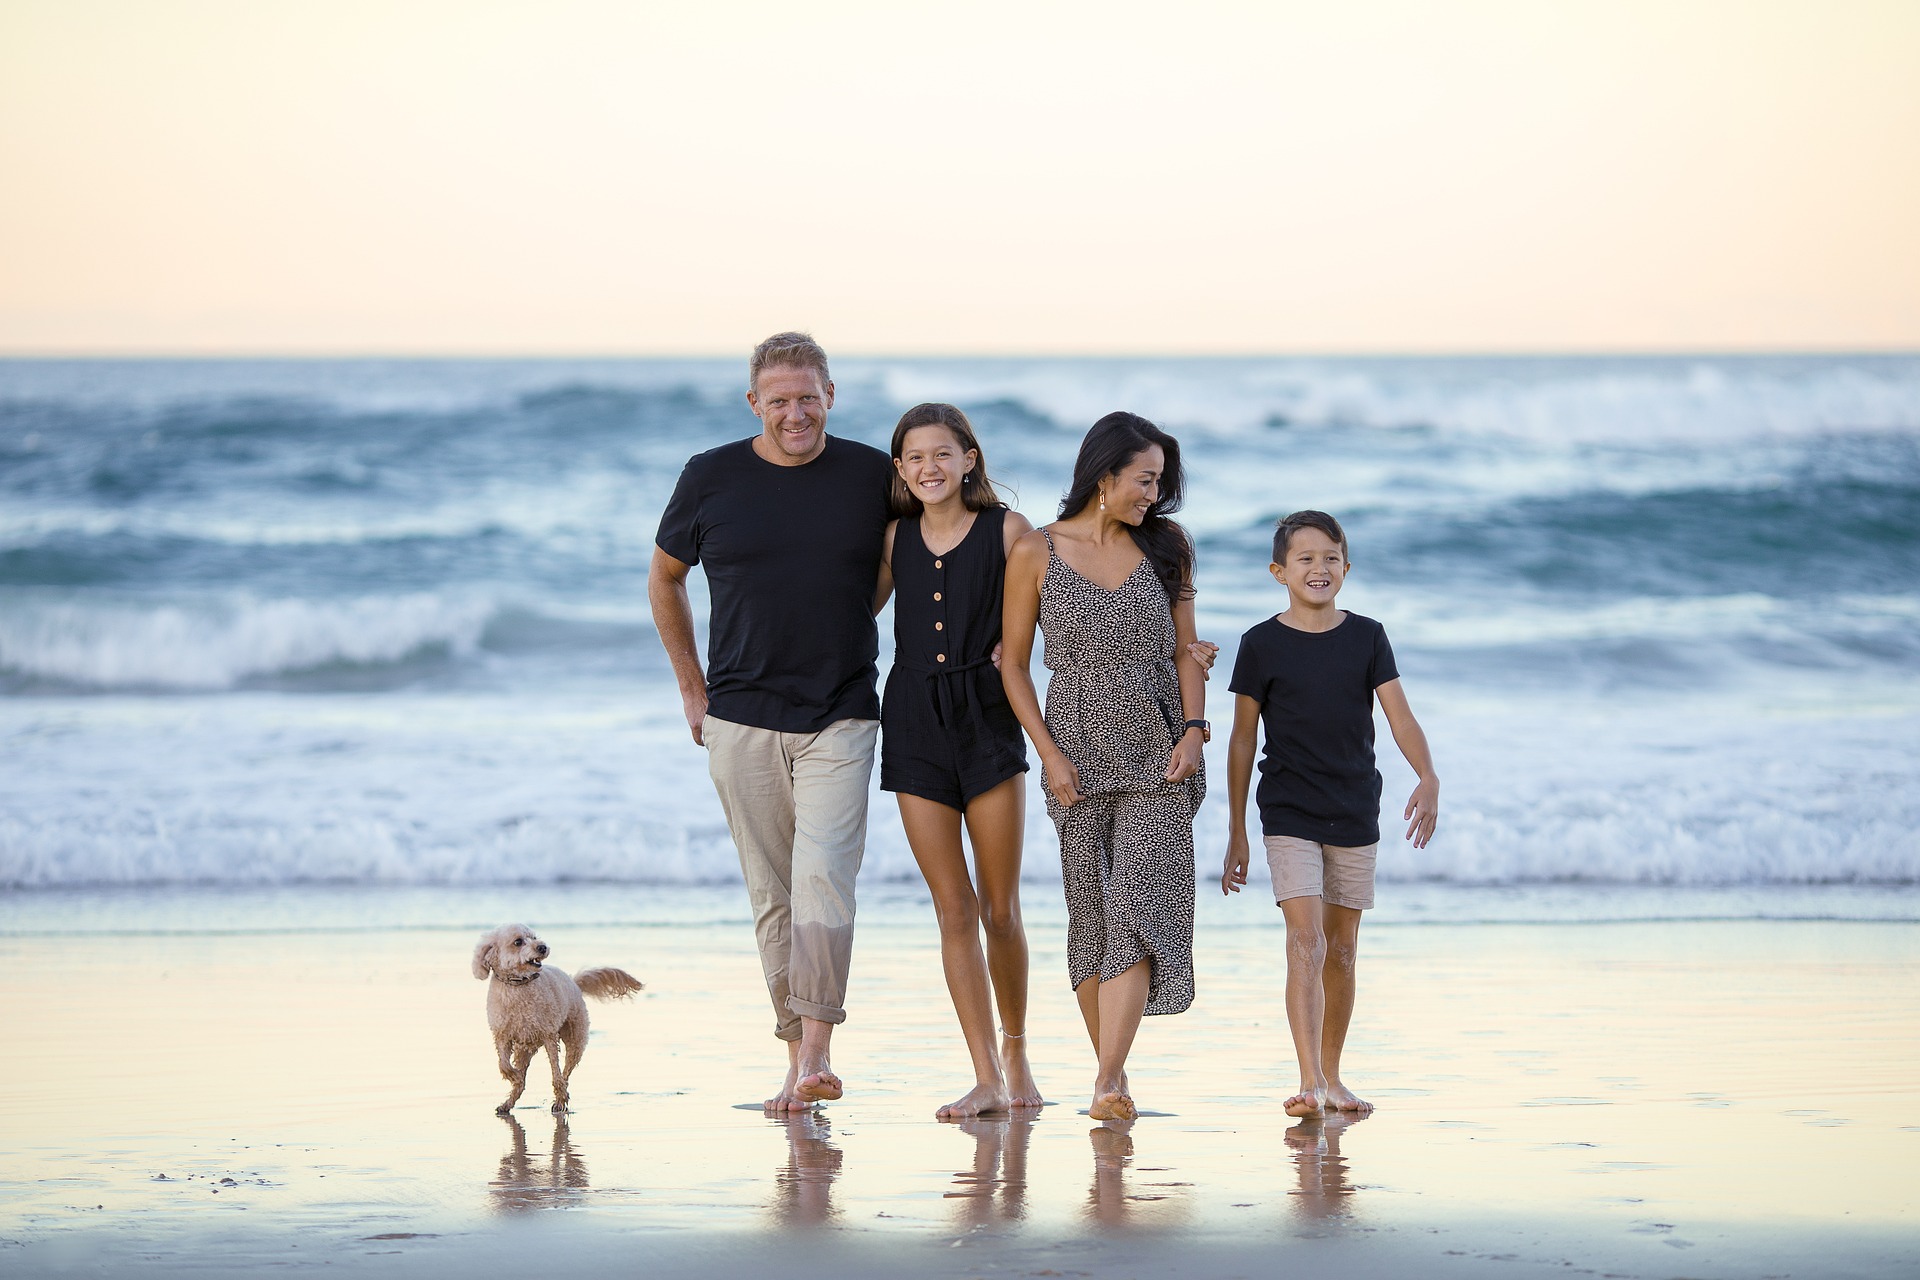 A family, father, mother, 2 children and a dog walking on the beach